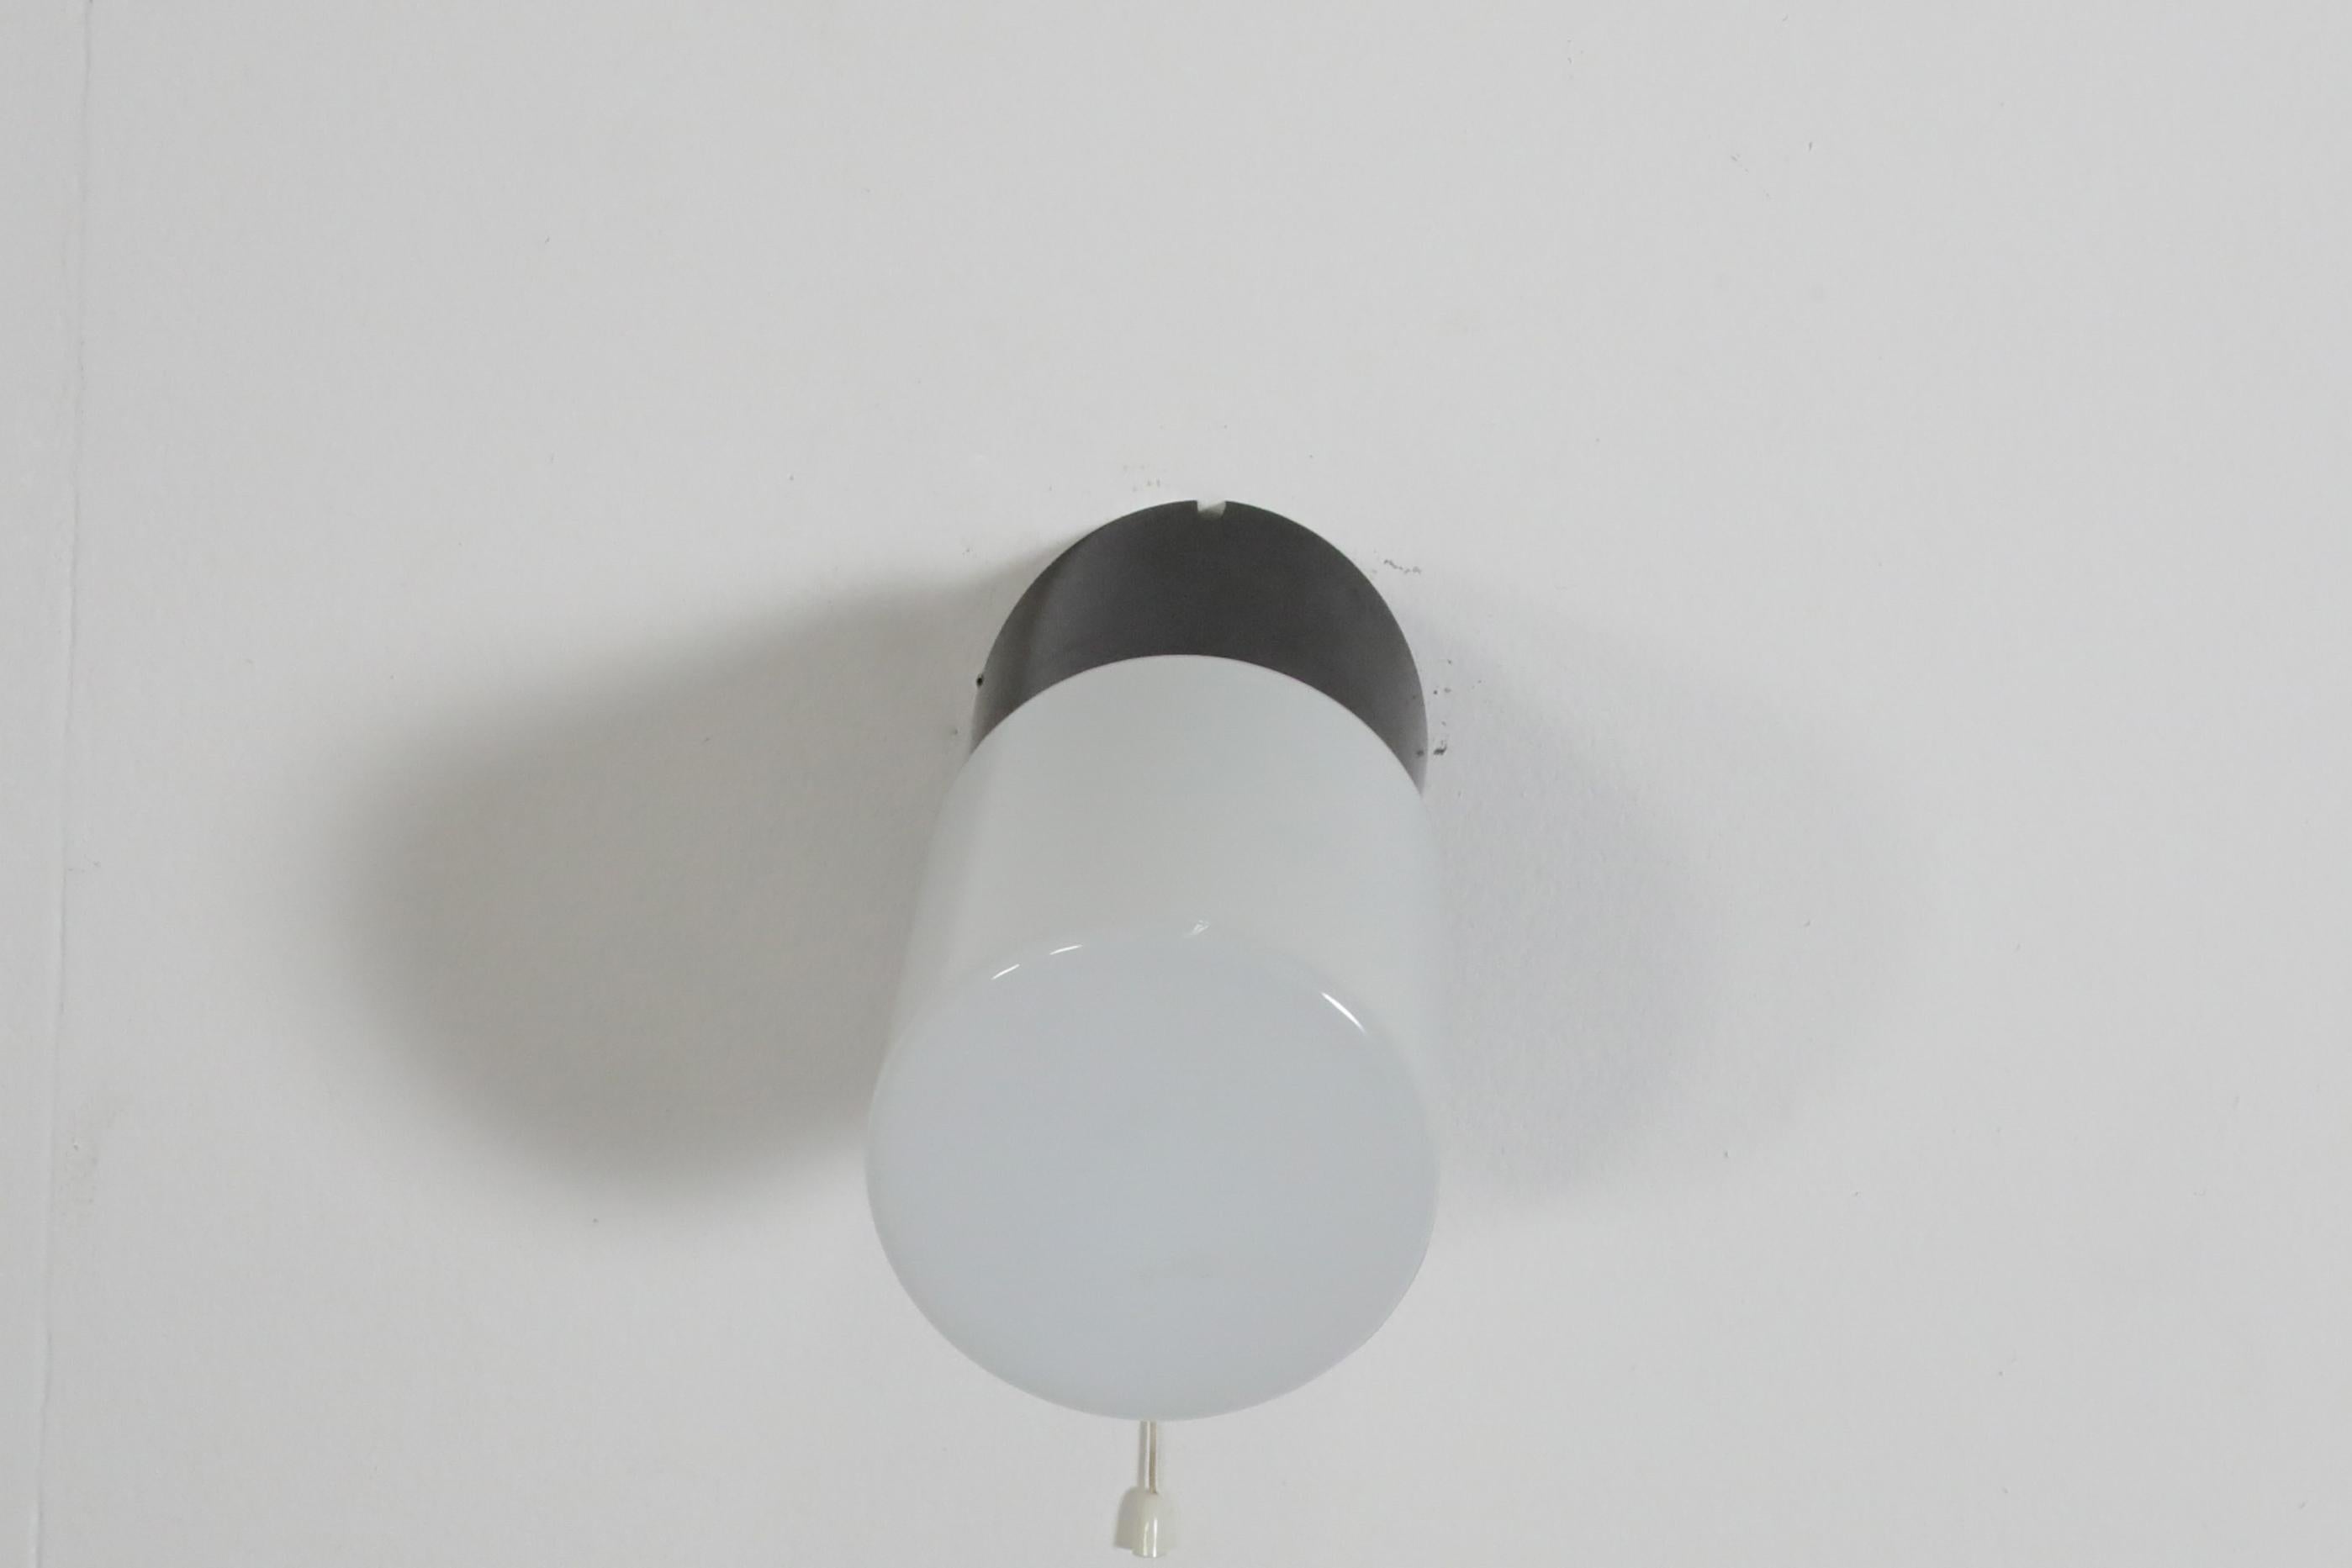 Mid-20th Century Cylinder Milk Glass Sconce with Black Bakelite Base and Pull String Switch For Sale